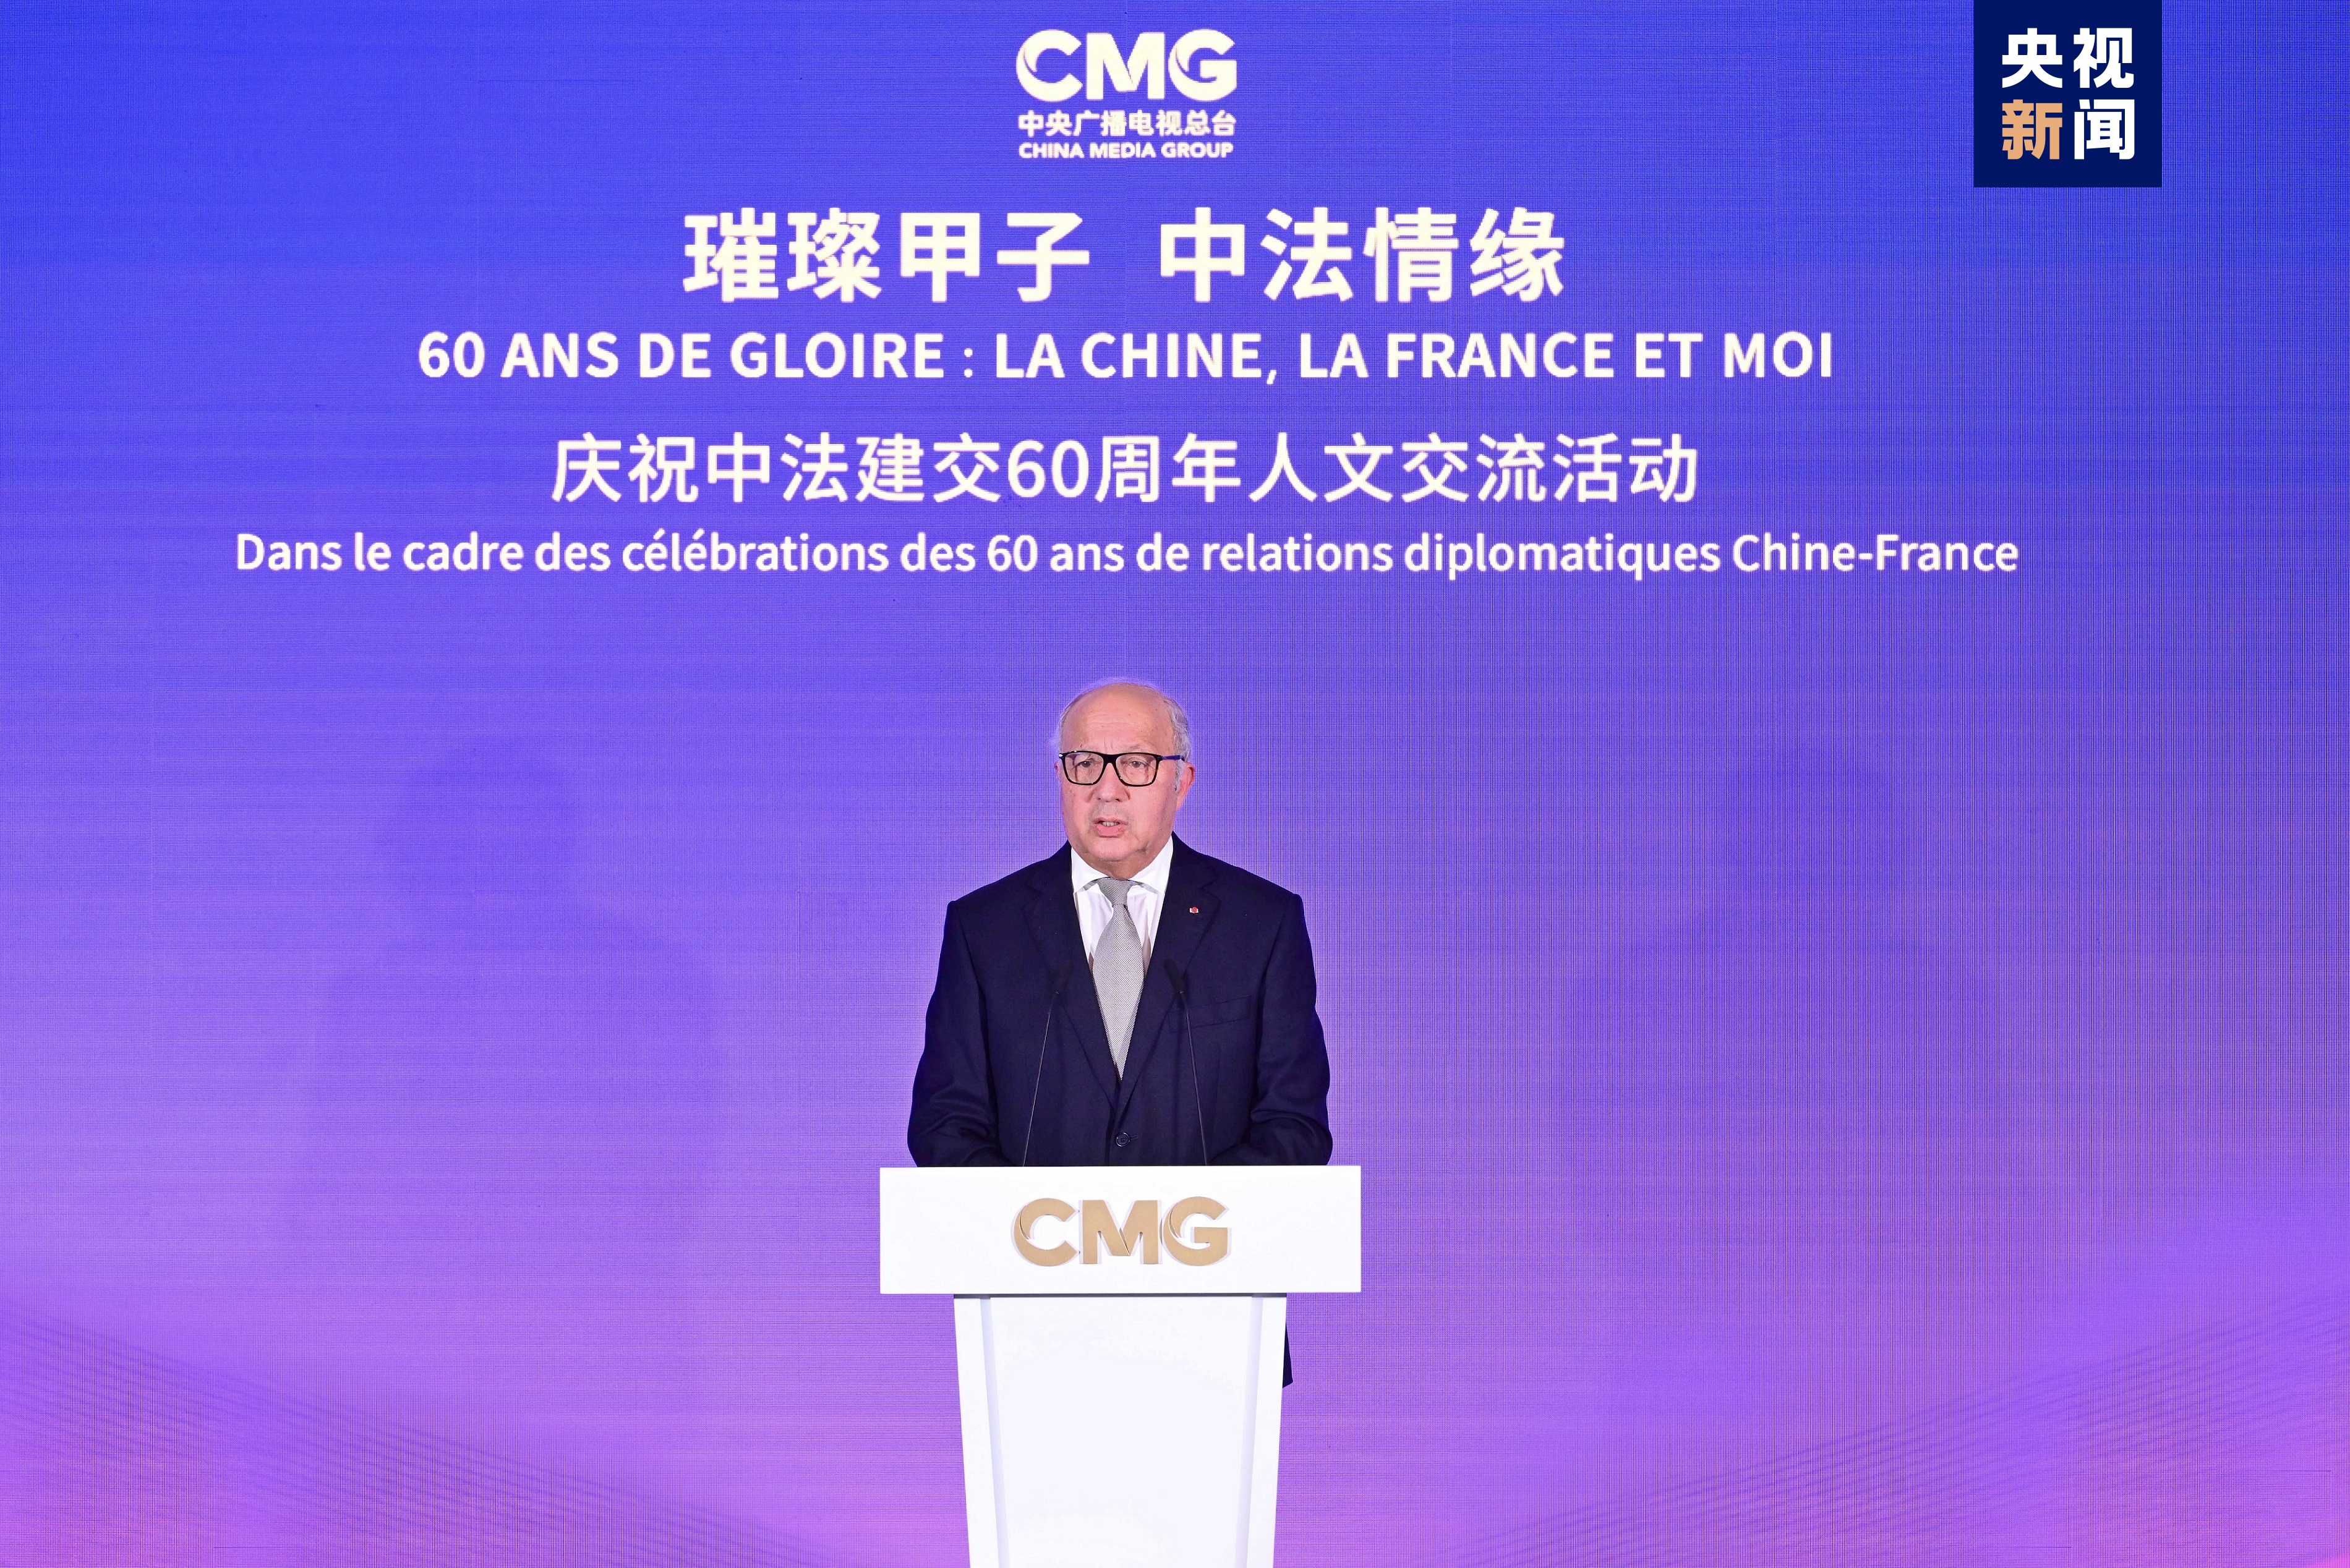 Laurent Fabius, president of the Constitutional Council and former French prime minister speaks during the event, Paris, France, May 6, 2024. /CMG